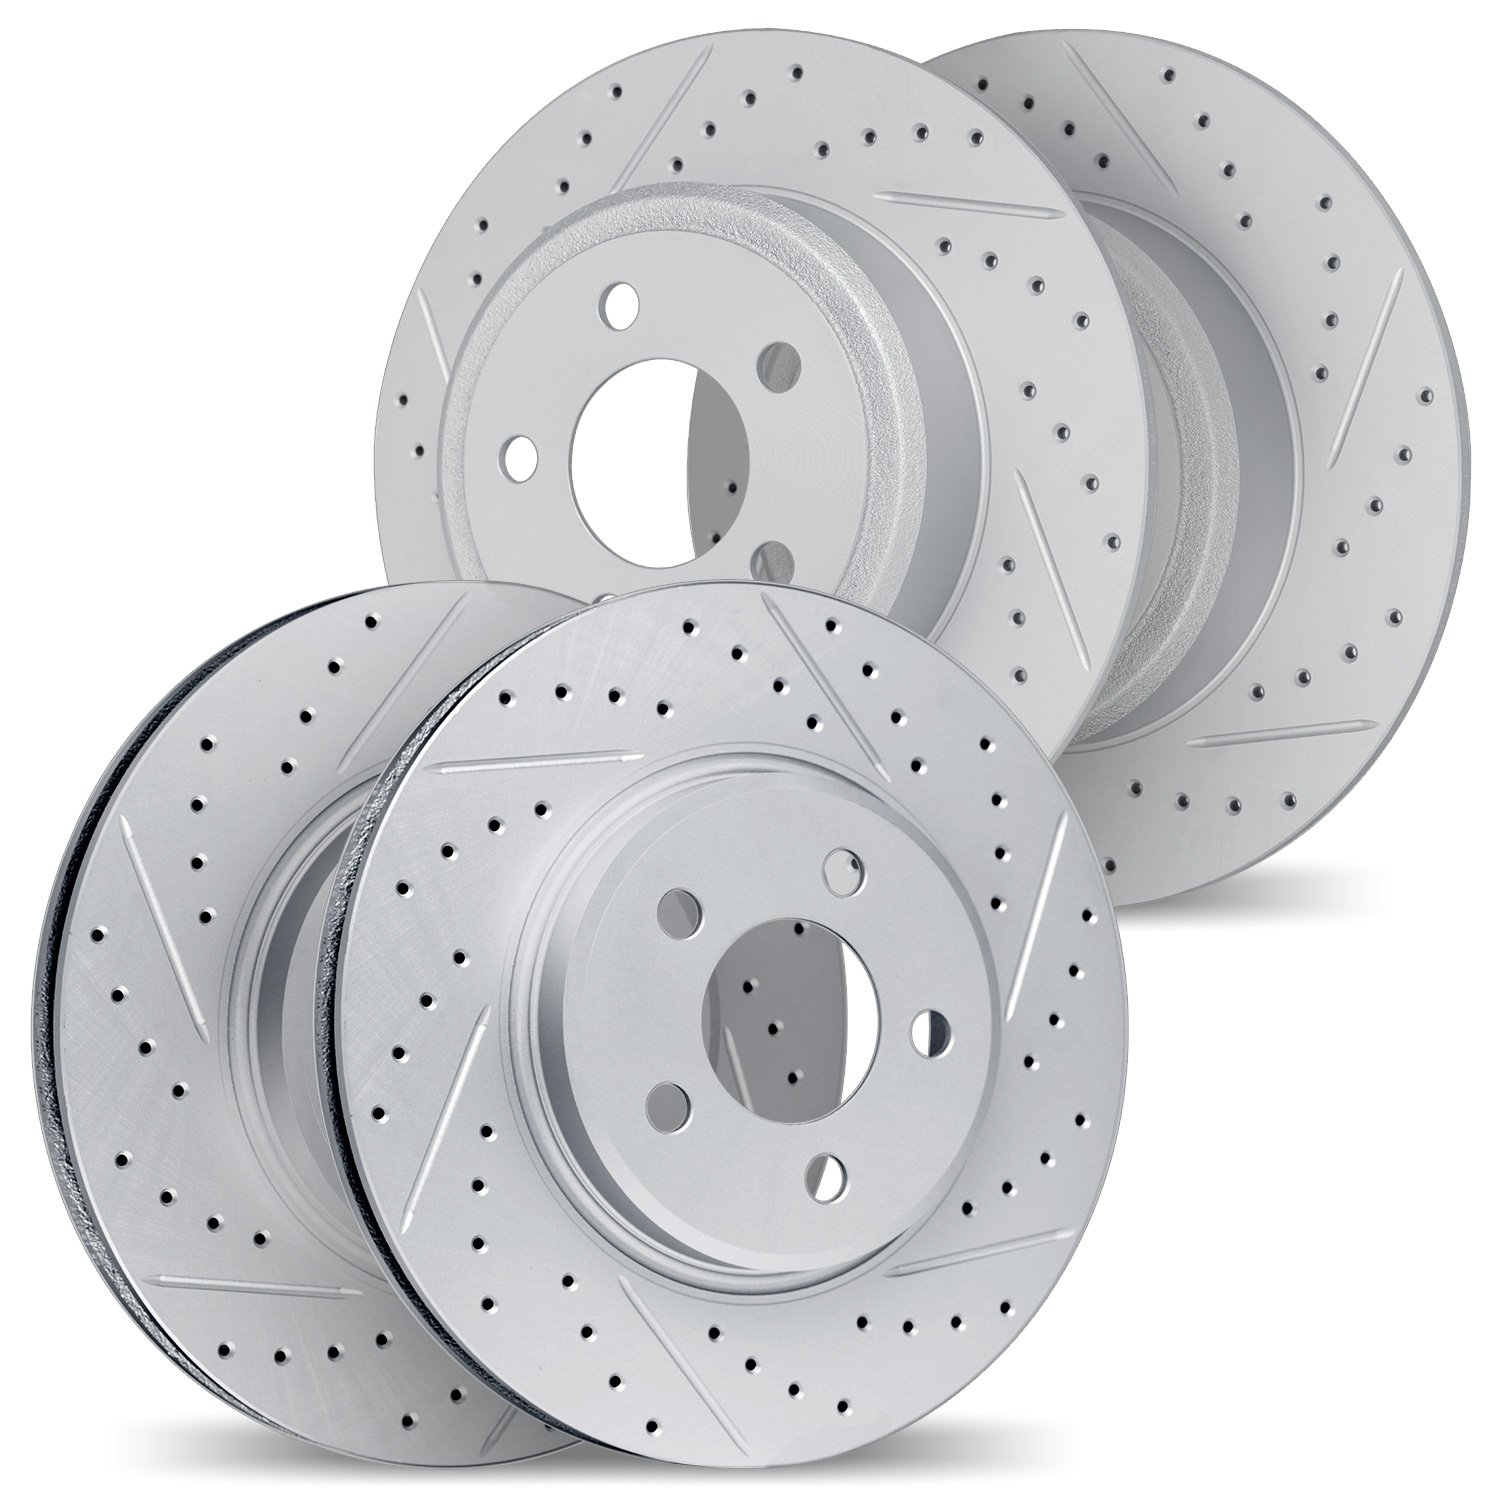 2004-58003 Geoperformance Drilled/Slotted Brake Rotors, 2017-2020 Acura/Honda, Position: Front and Rear